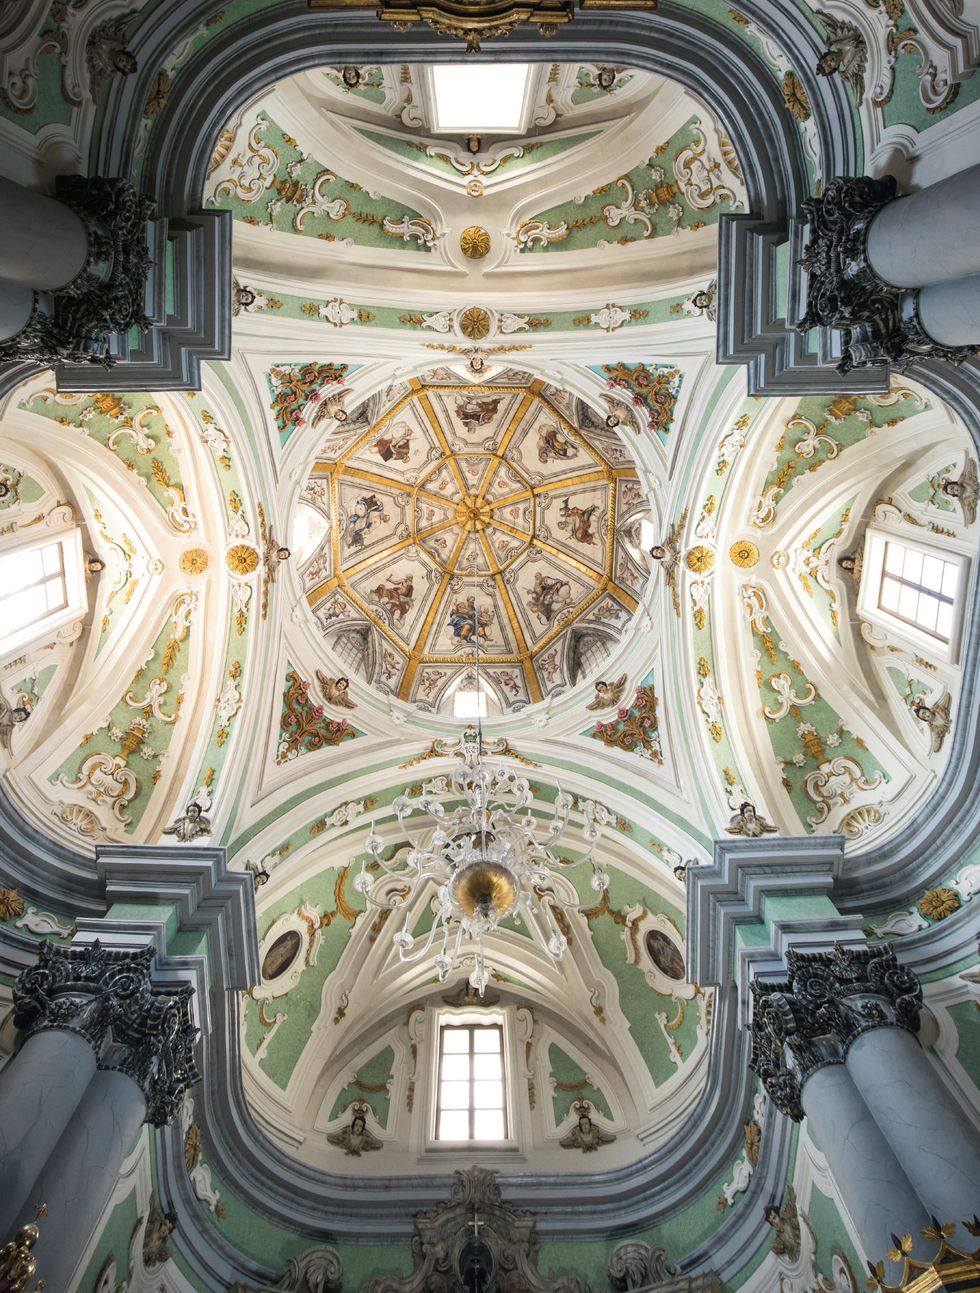 Ceiling, Architecture, Holy places, Vault, Symmetry, Classical architecture, Building, Place of worship, Cathedral, Religious institute, 